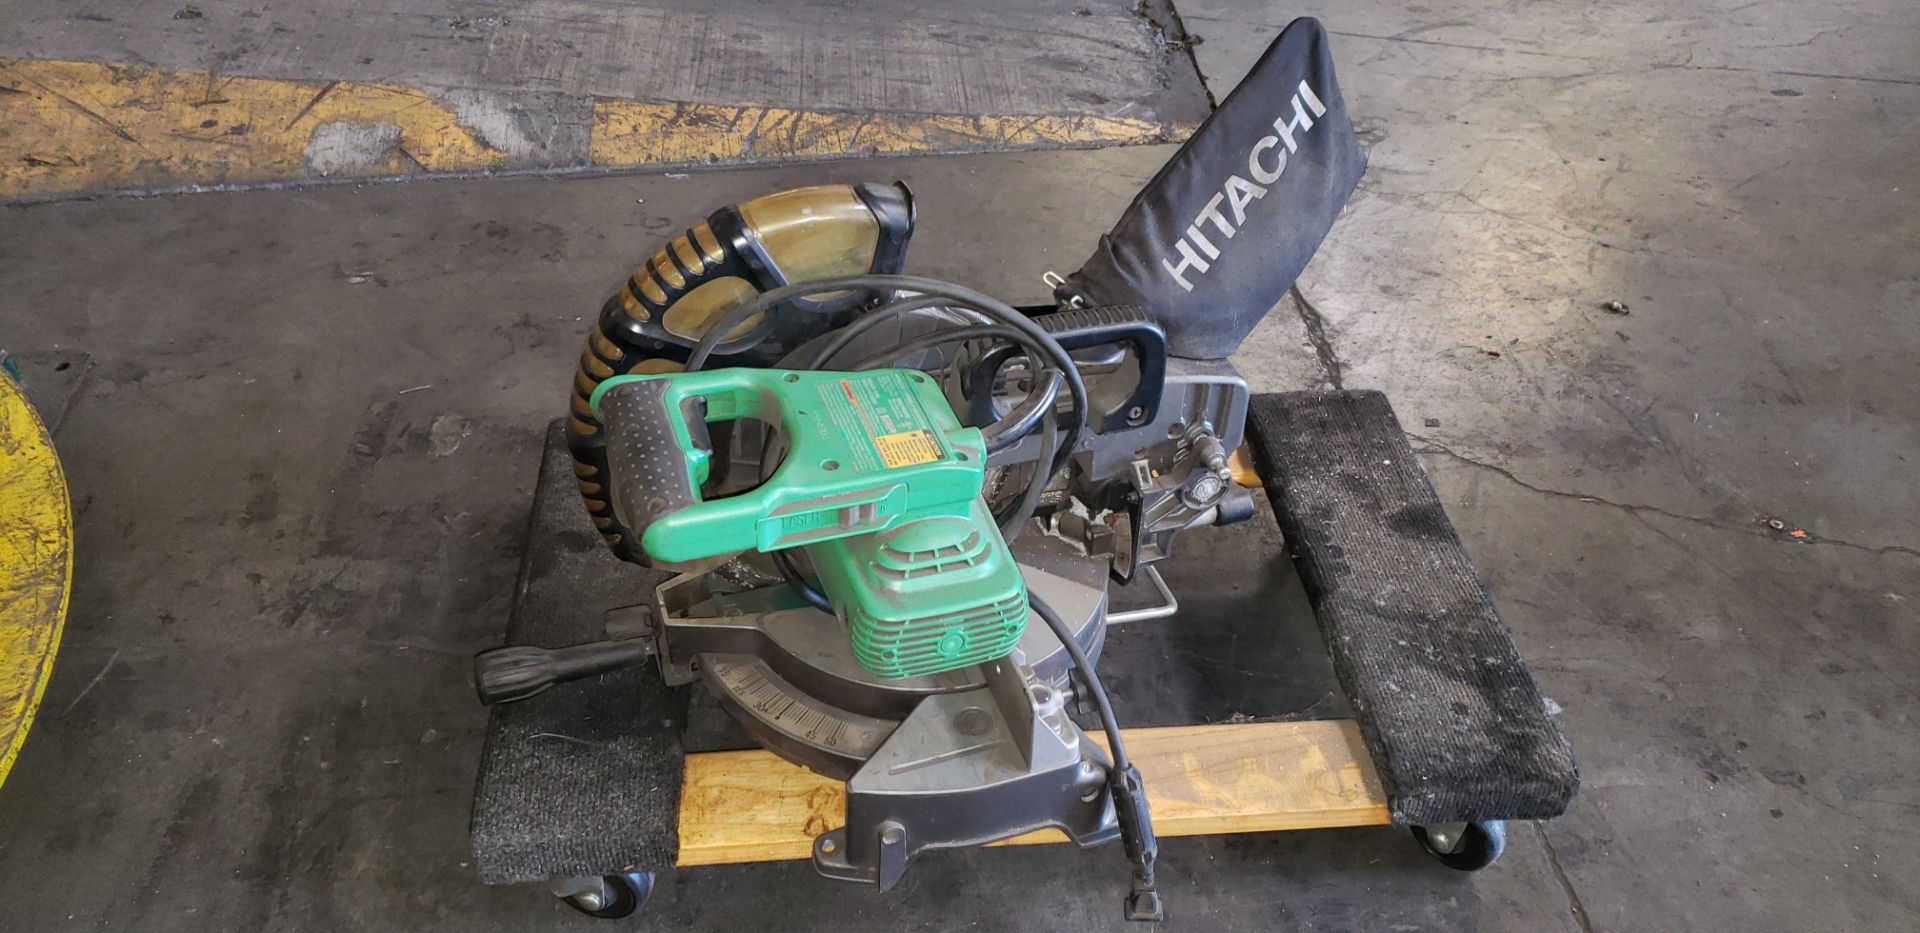 Hitachi, Mdl: C10-FCH2 10" Compound Miter Saw V-120, AMPs 15, HZ 60, 1520W , S/N: C581157, Located - Image 3 of 4